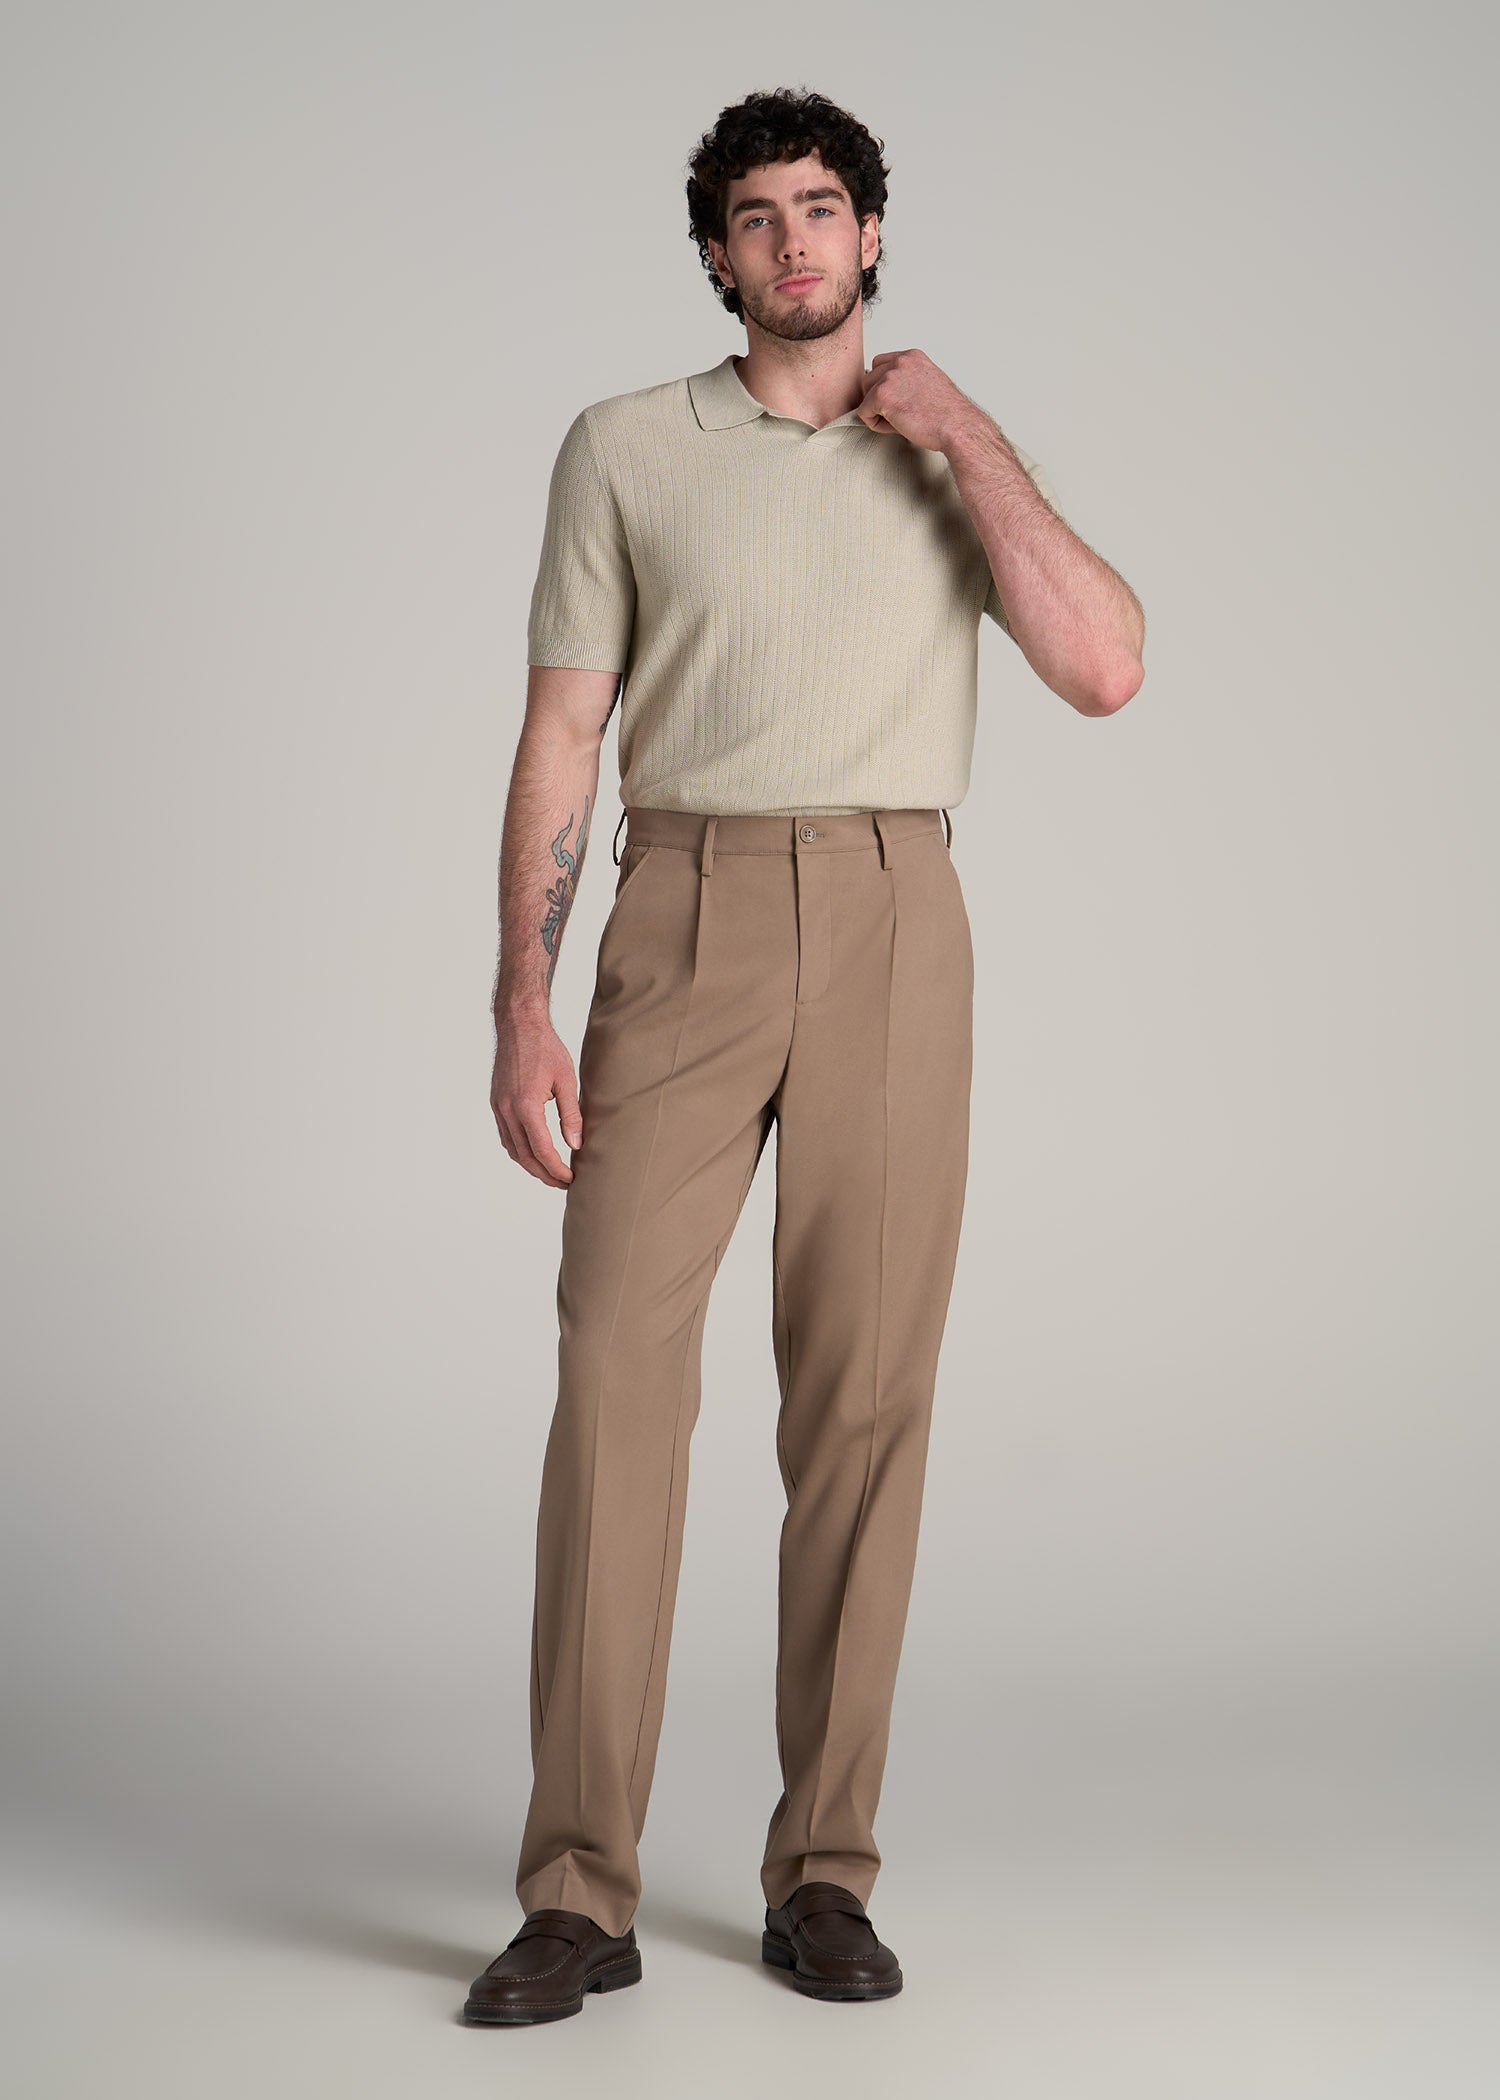 Six Ways To Wear Men's Pleated Trousers (And Shorts) This Spring | The  Journal | MR PORTER